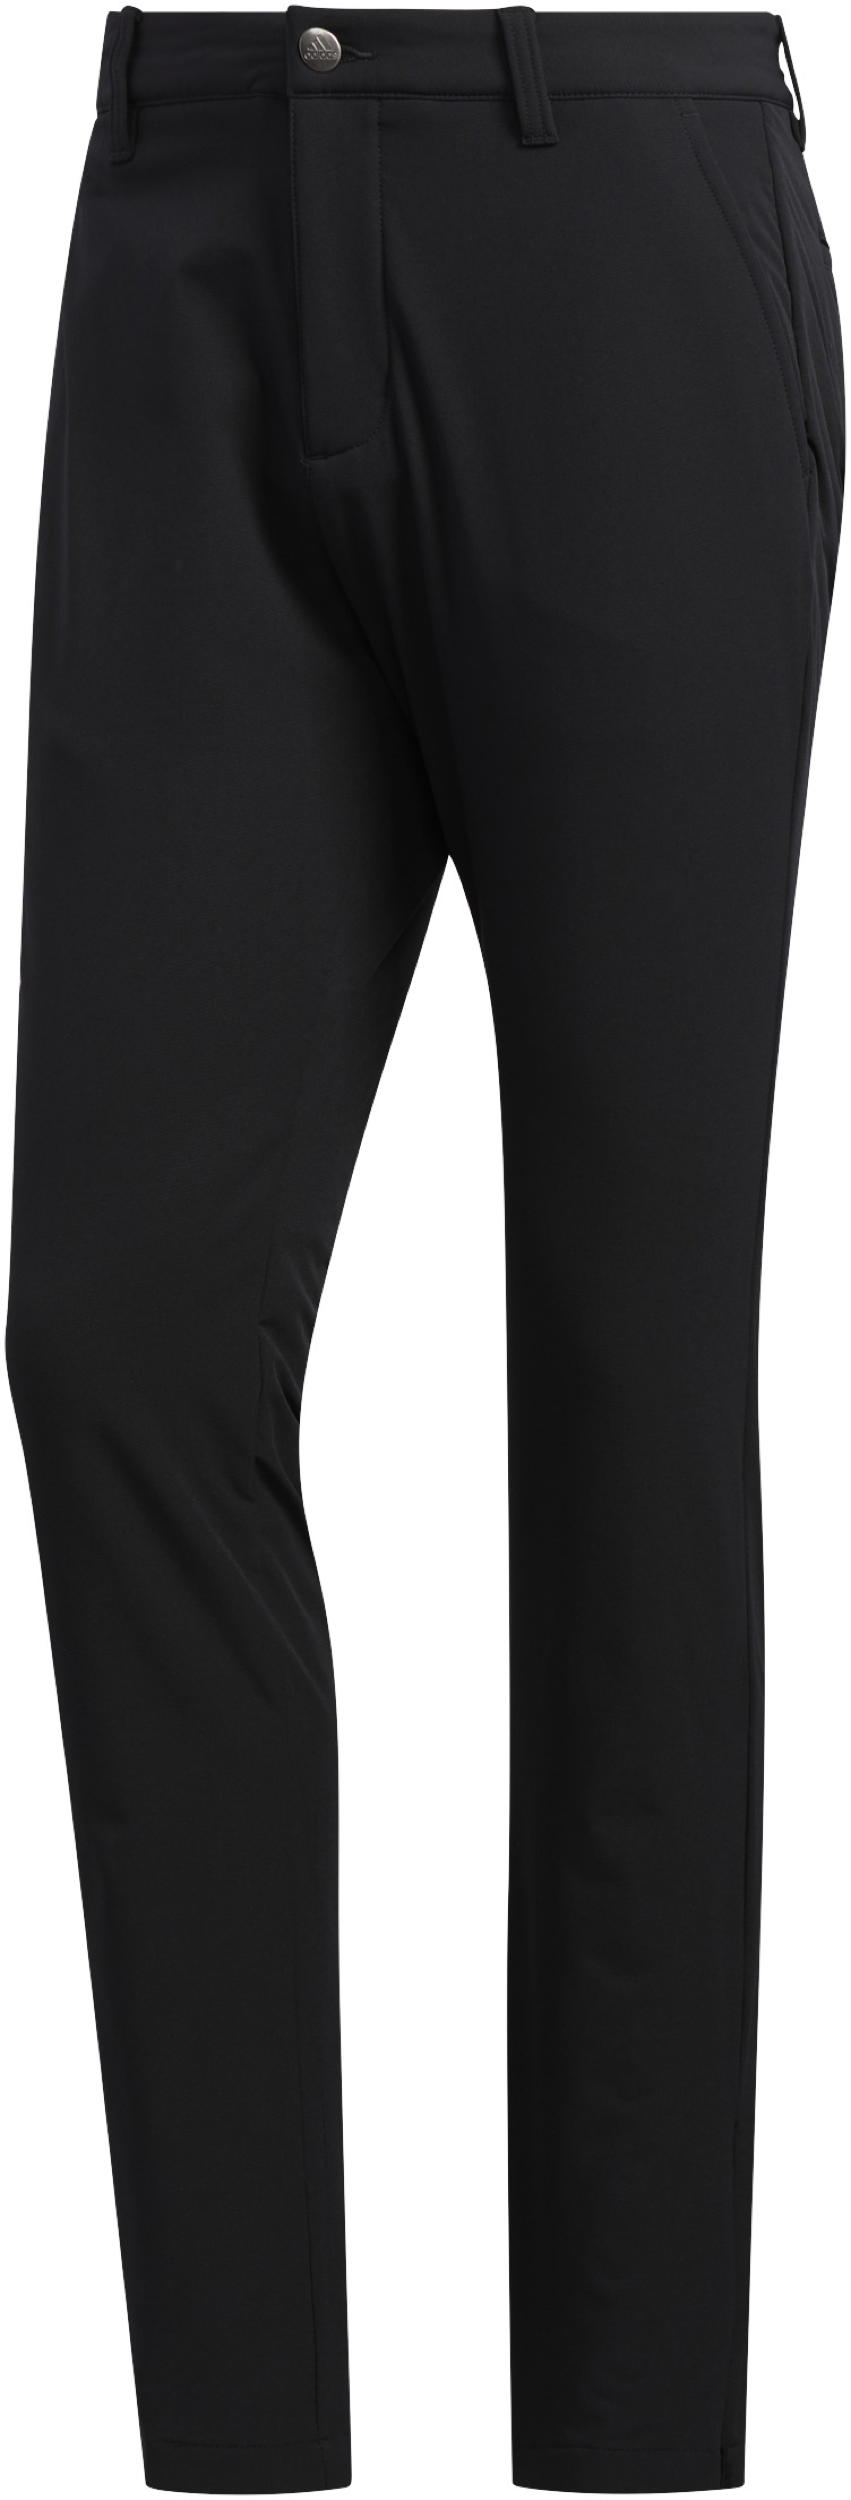 adidas Ultimate365 Tapered Golfhose, schwarz